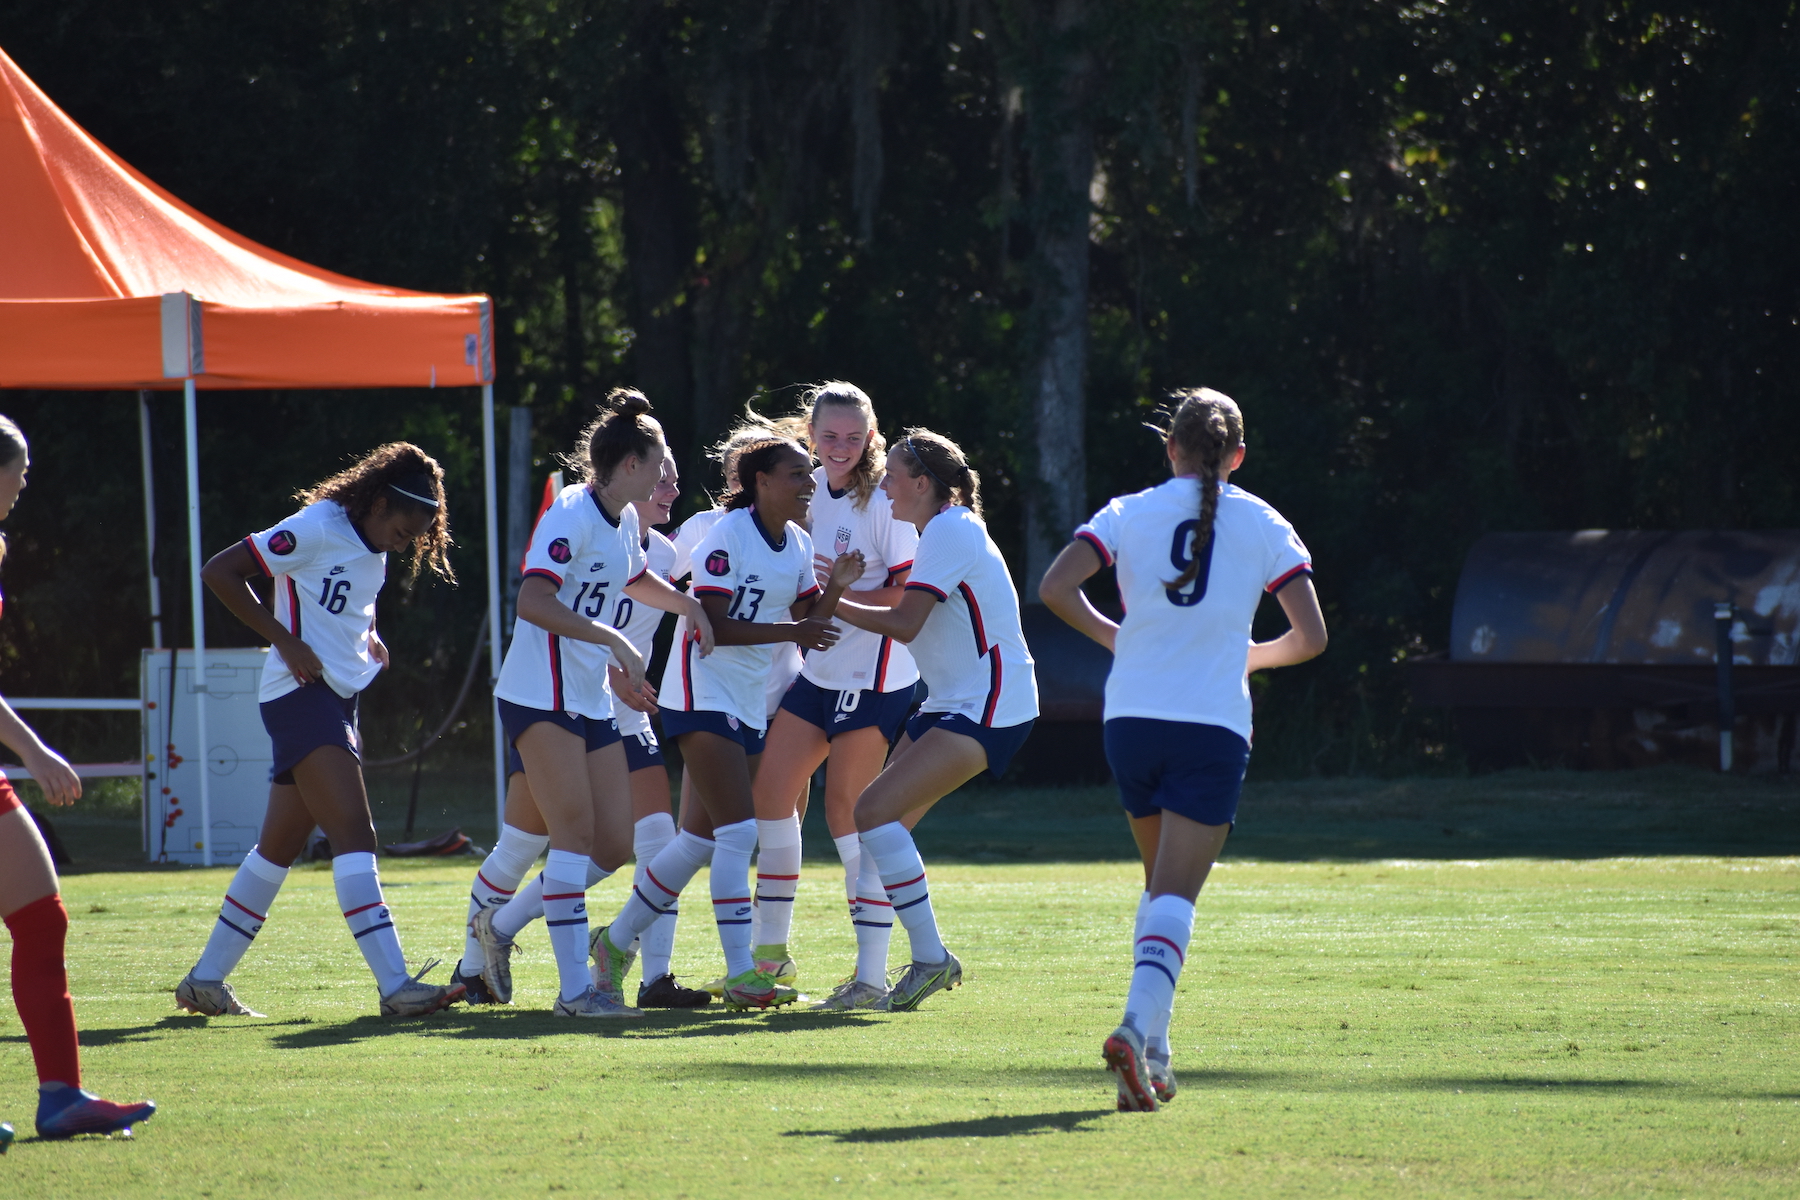 2022 Concacaf Girls' U-15 Championship final rosters announced